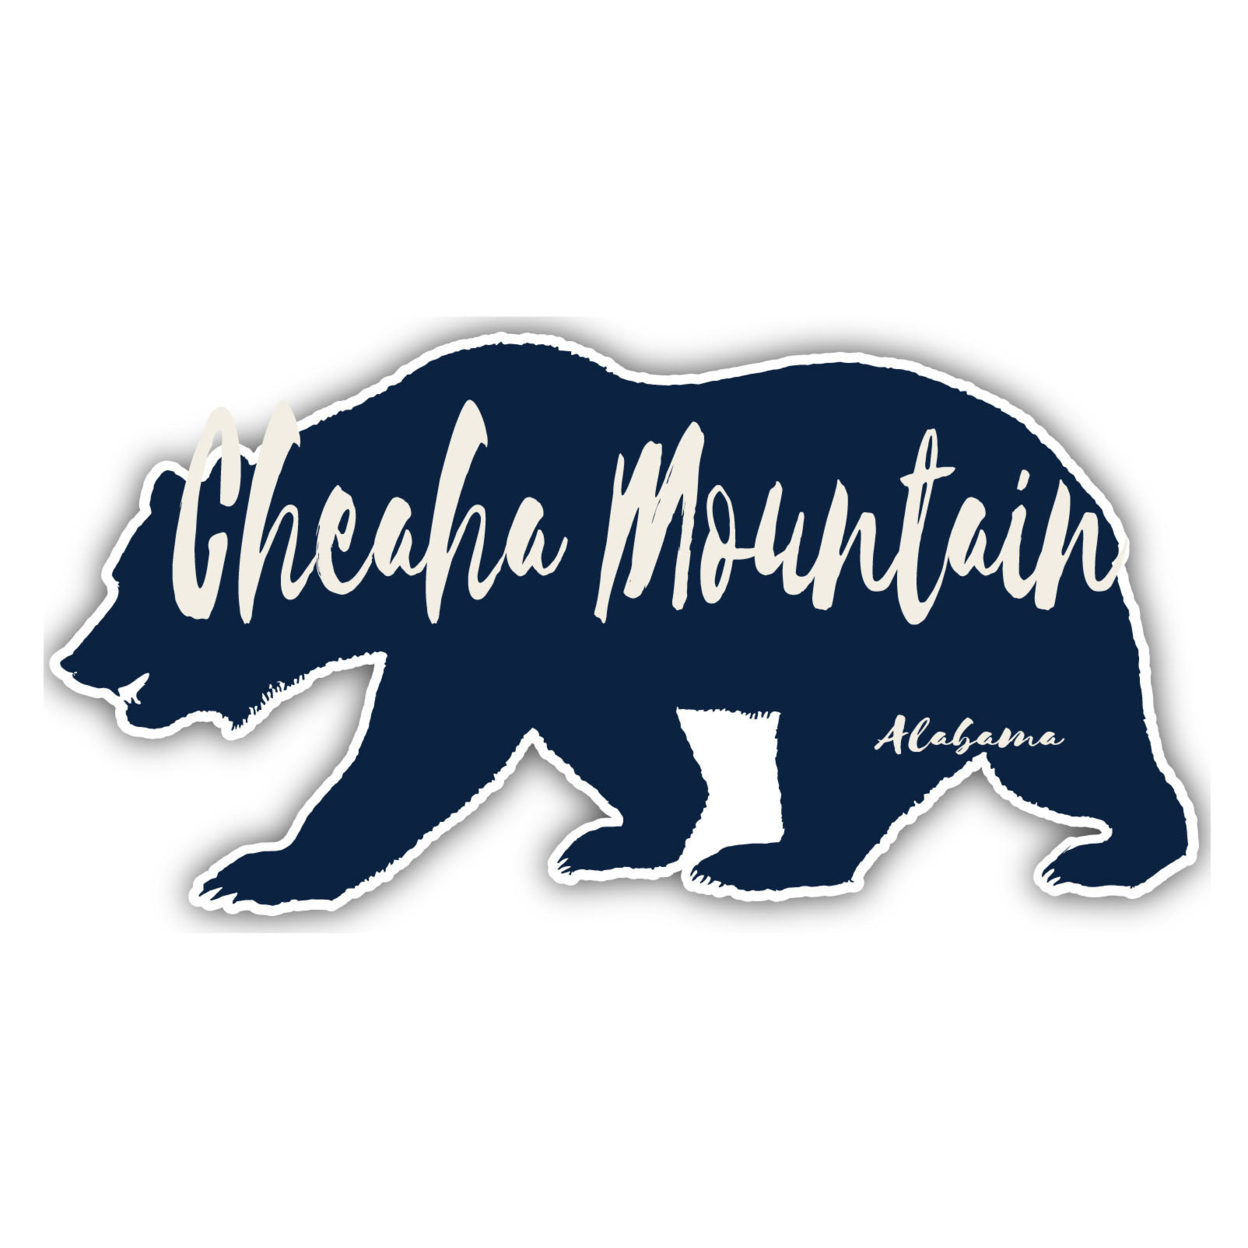 Cheaha Mountain Alabama Souvenir Decorative Stickers (Choose Theme And Size) - 4-Pack, 6-Inch, Tent